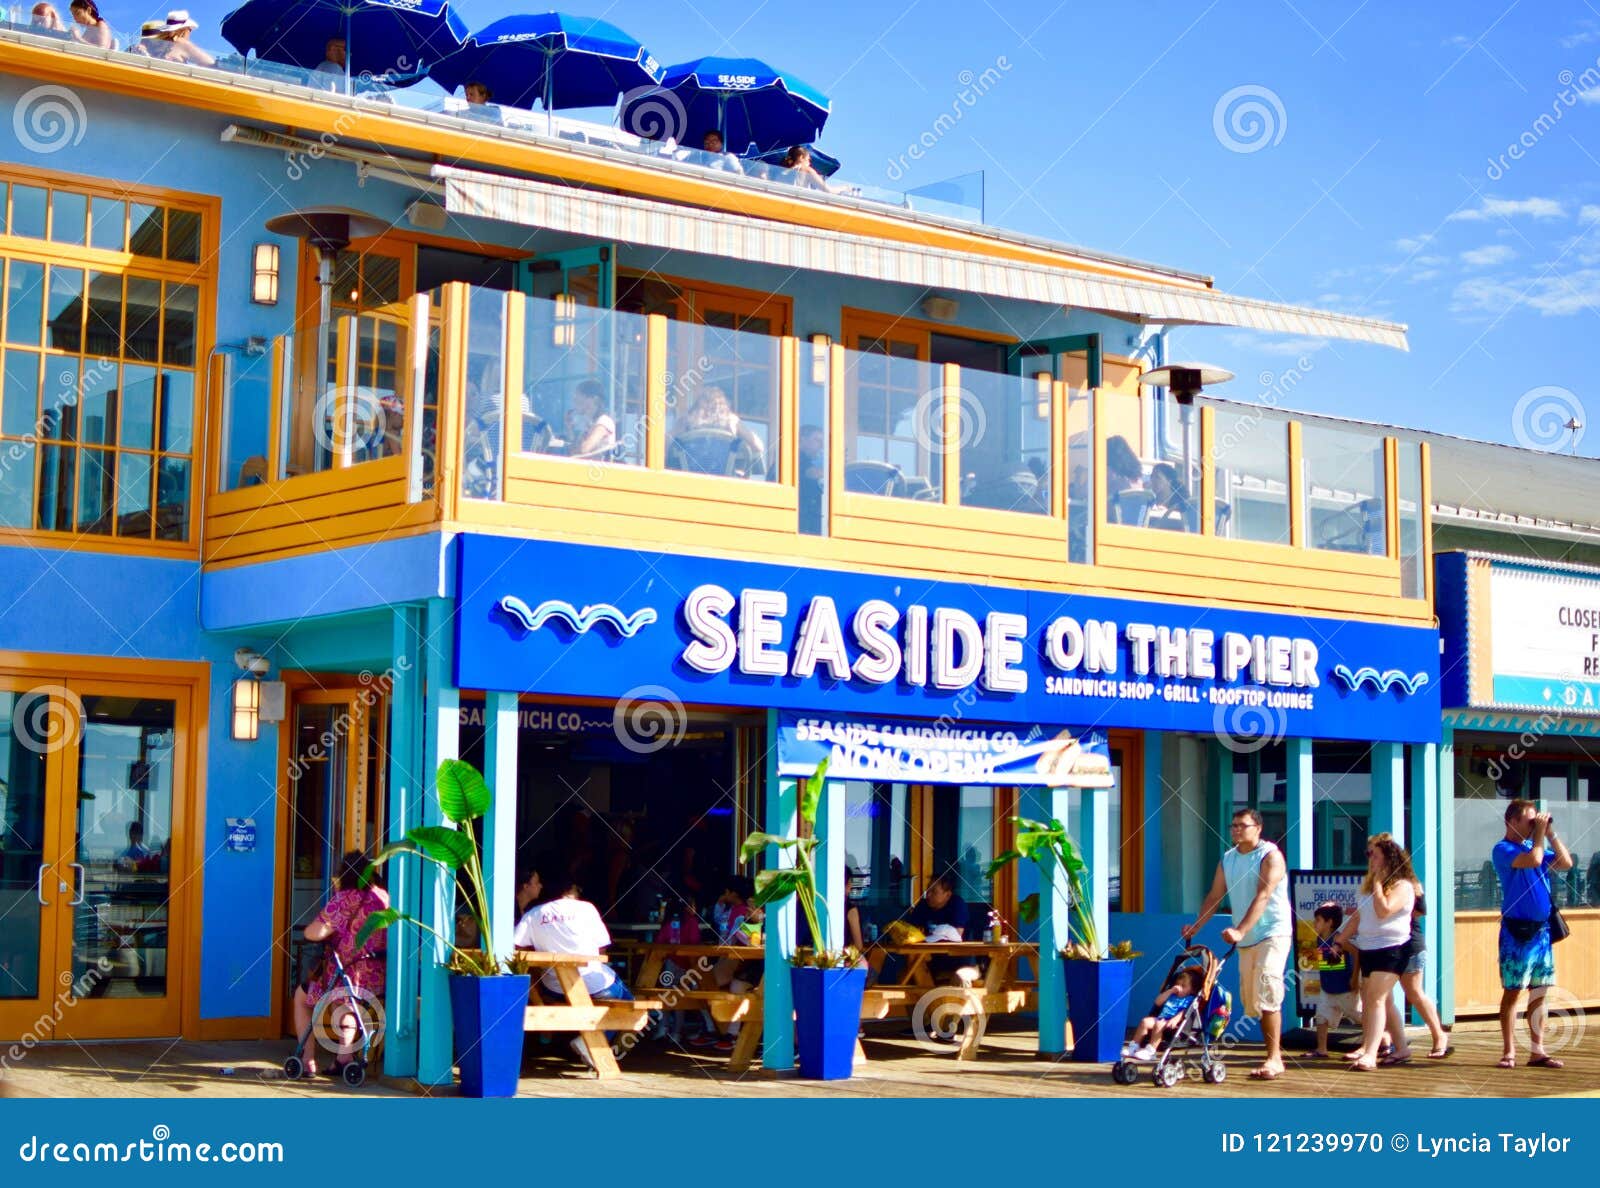 Seaside Restaurant on the Pier Editorial Image - Image of